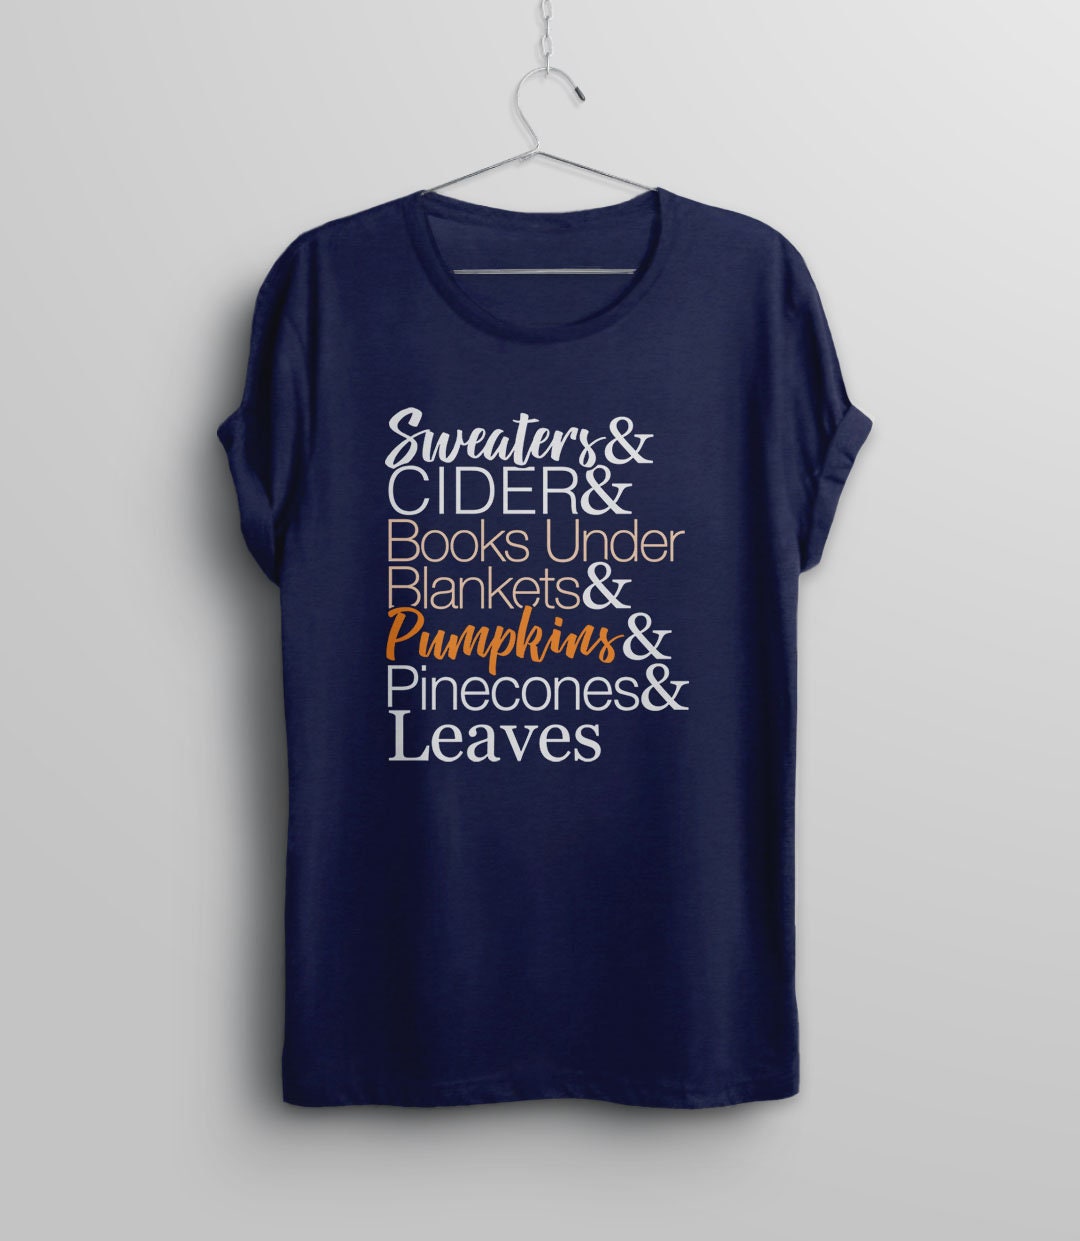 Fall Graphic Tee | Womens Autumn Shirt, Navy Blue Unisex XS by BootsTees